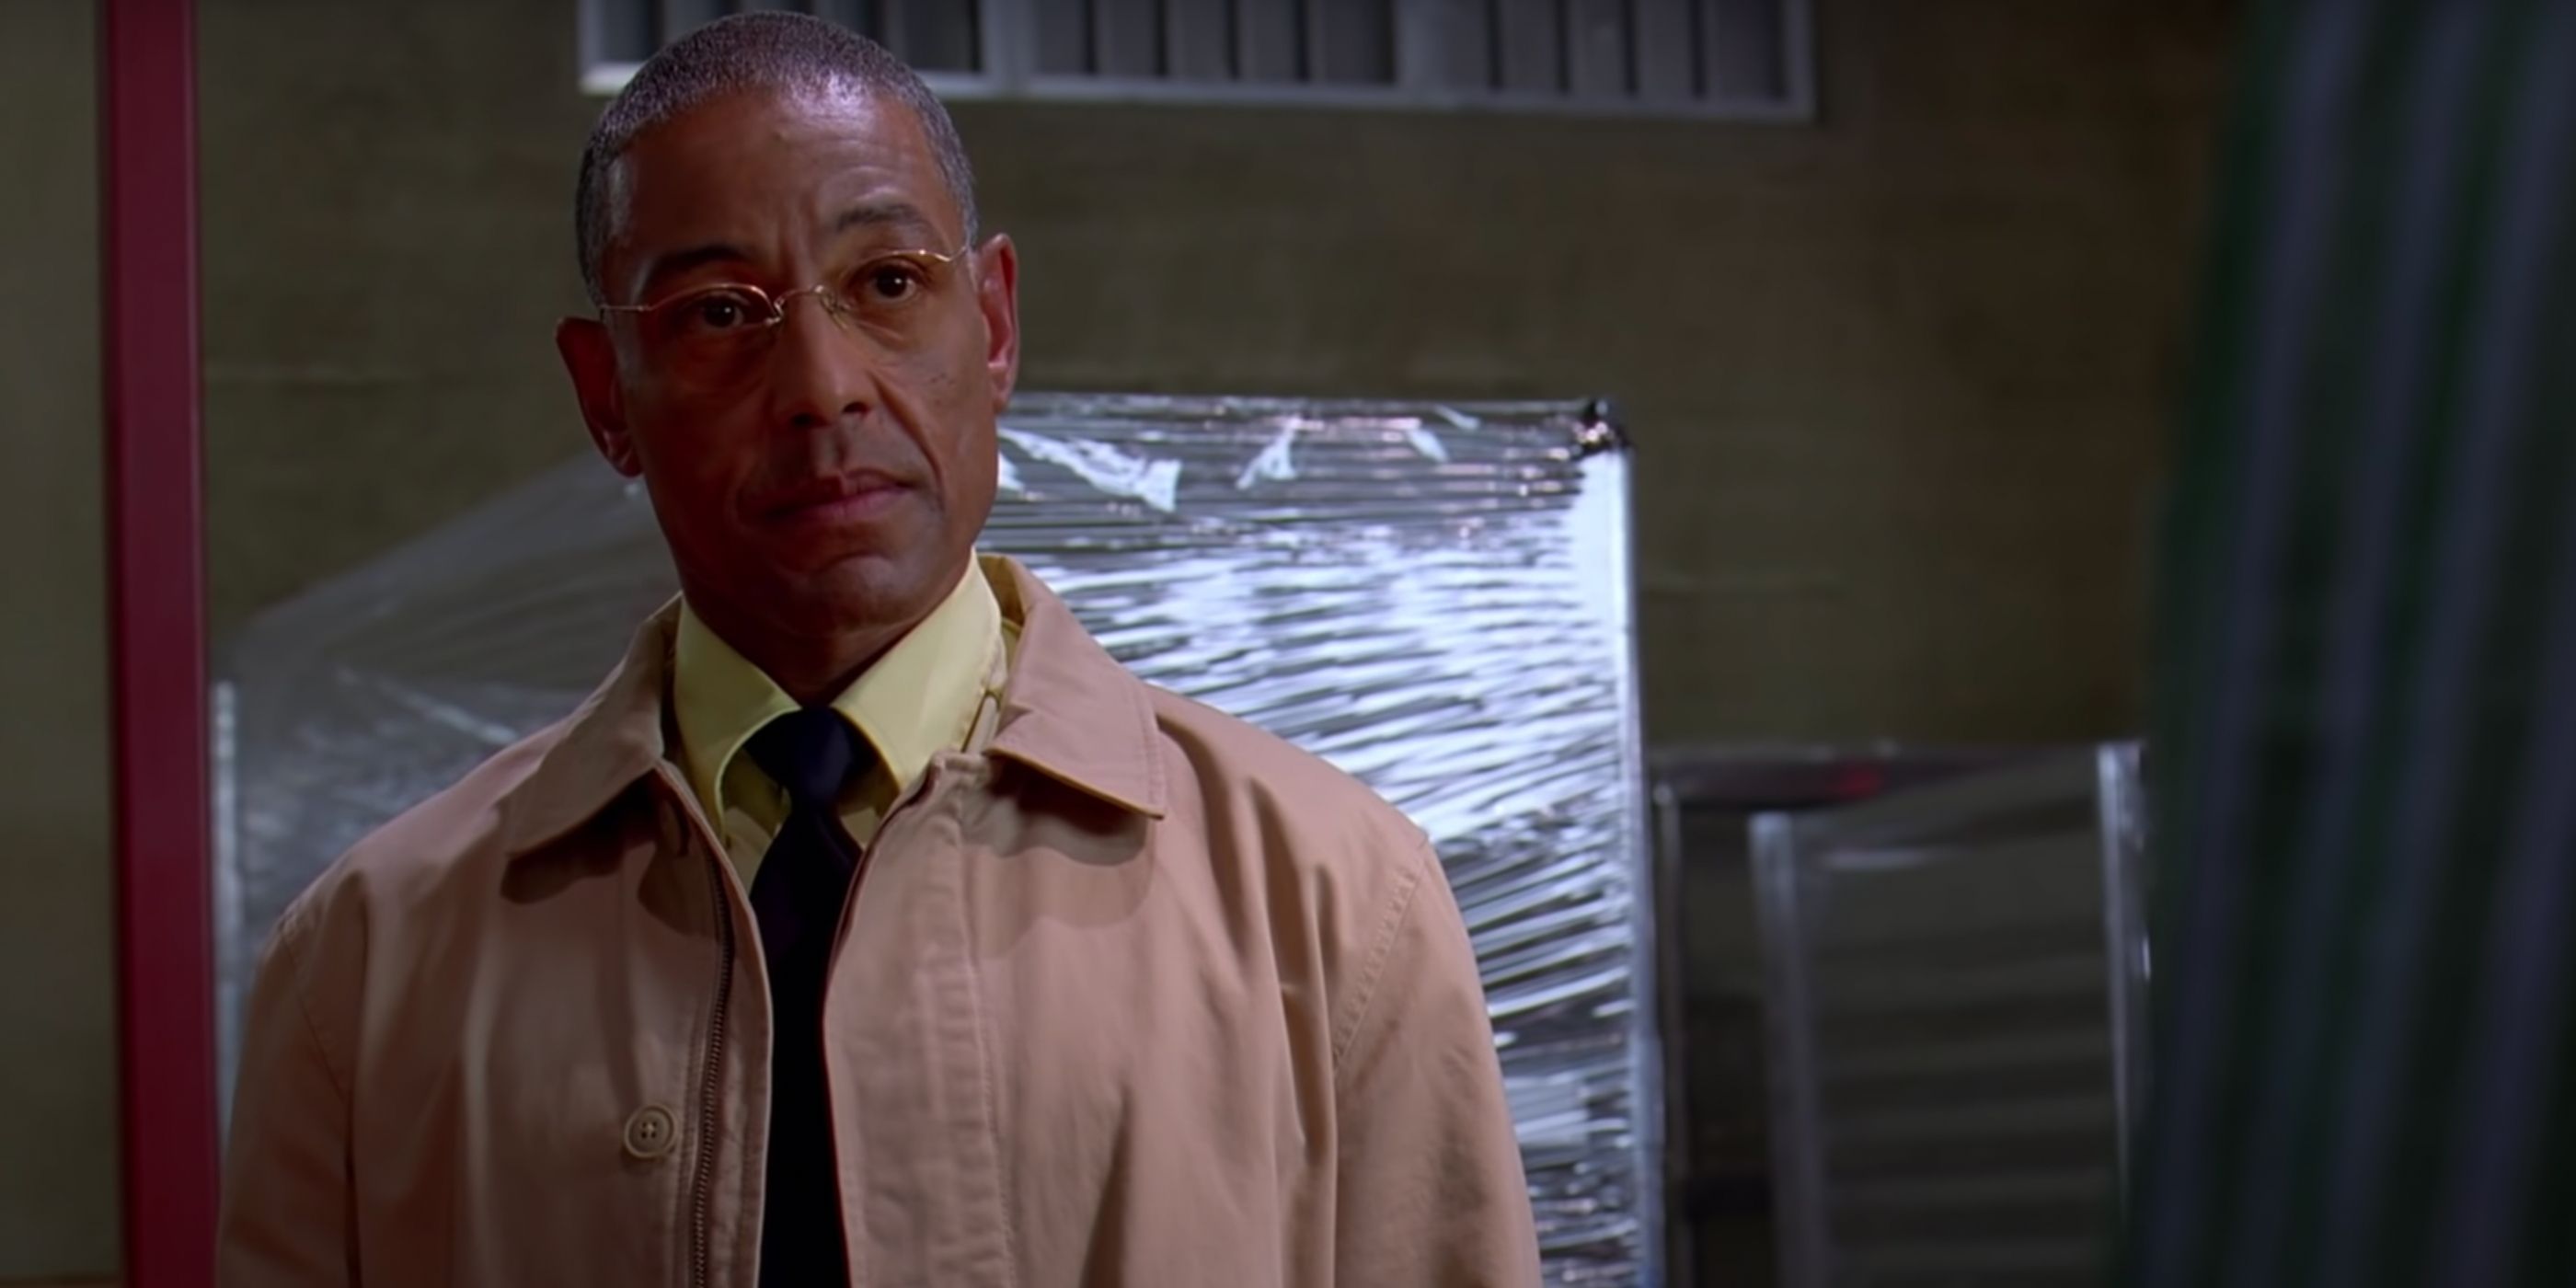 Gustavo Fring shows Walter White around an incredible laboratory, trying to convince him to work for him.